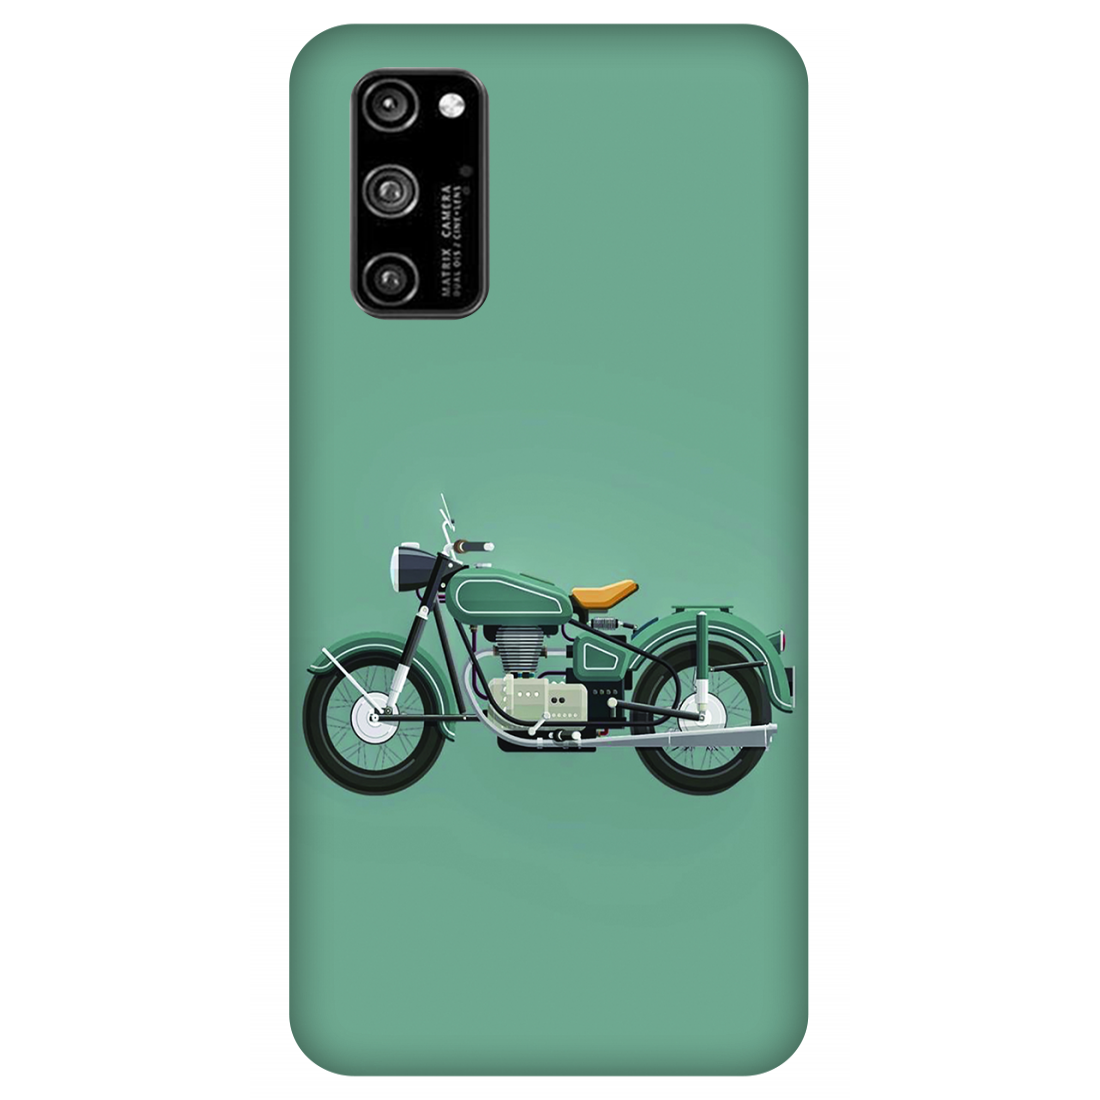 Showcasing a Motorcycle Case Honor V30 Pro 5G